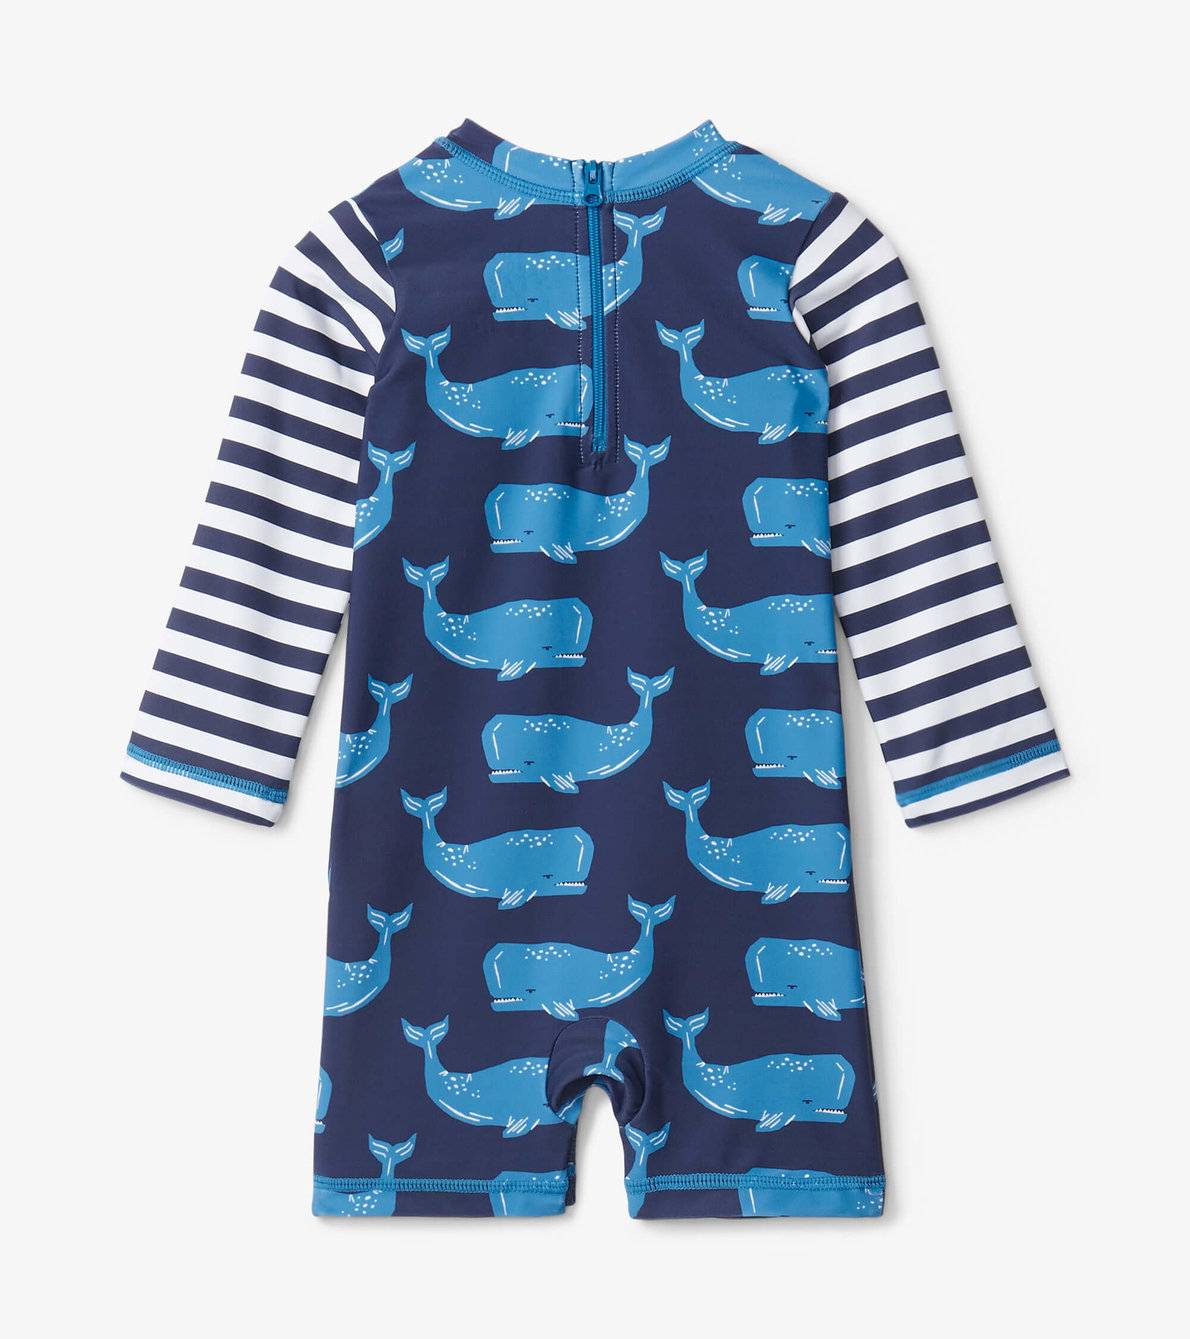 View larger image of Block Whales Baby One-Piece Rashguard